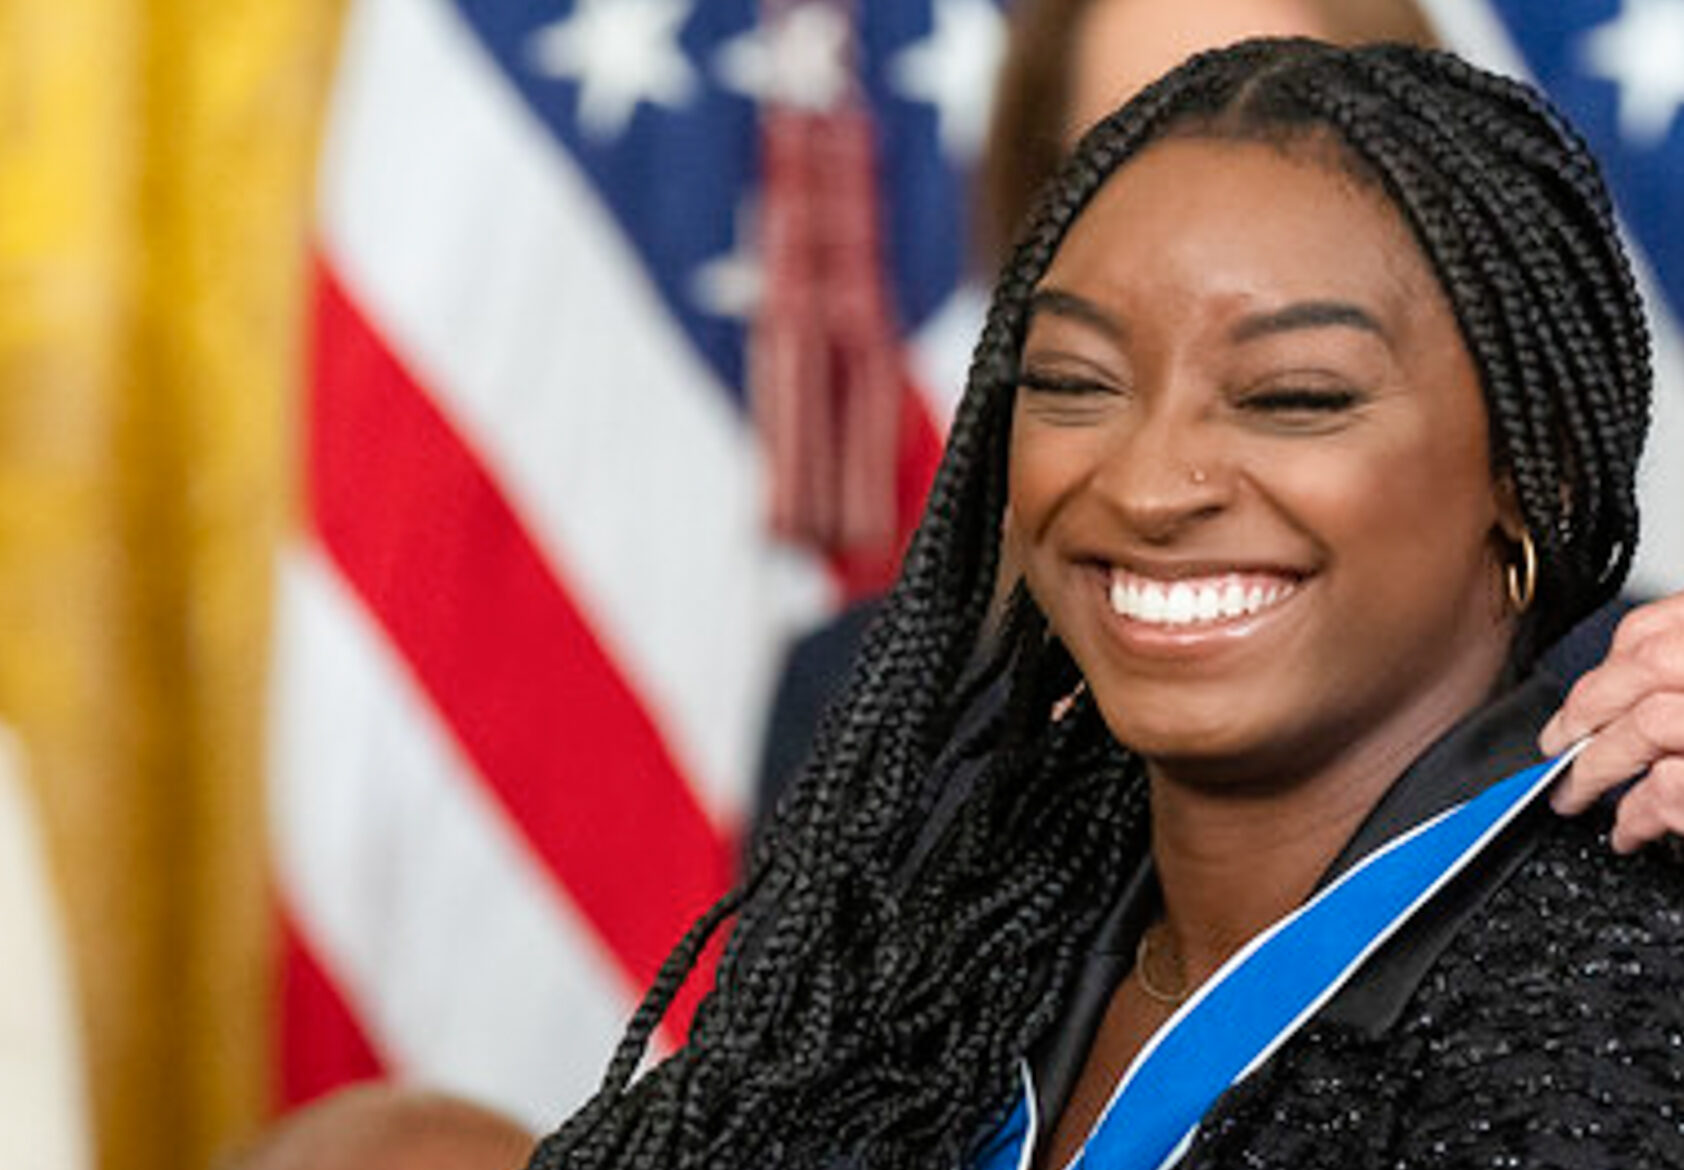 President Joe Biden presents the Medal of Freedom to gymnast Simon Biles, Thursday, July 7, 2022, in the East Room of the White House. Photo credit: Simone Biles, Adam Schultz